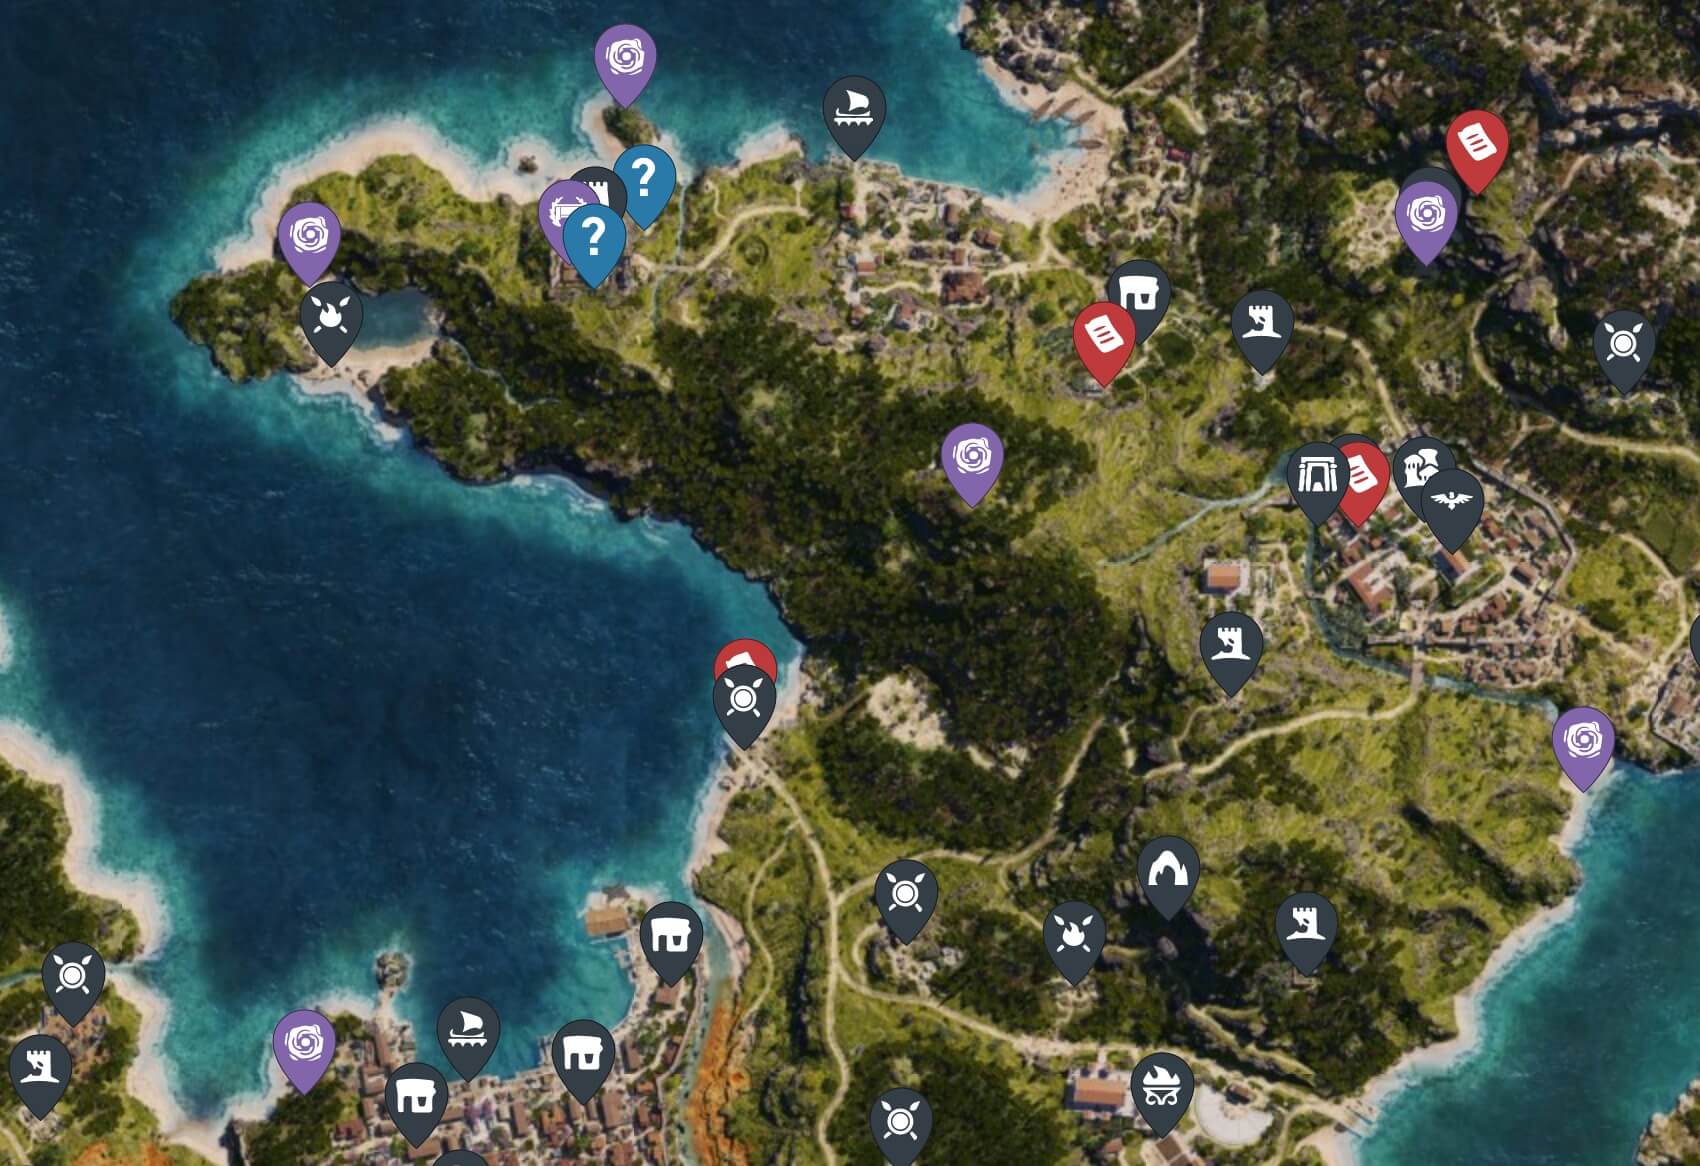 Assassin's Creed Odyssey Map Image